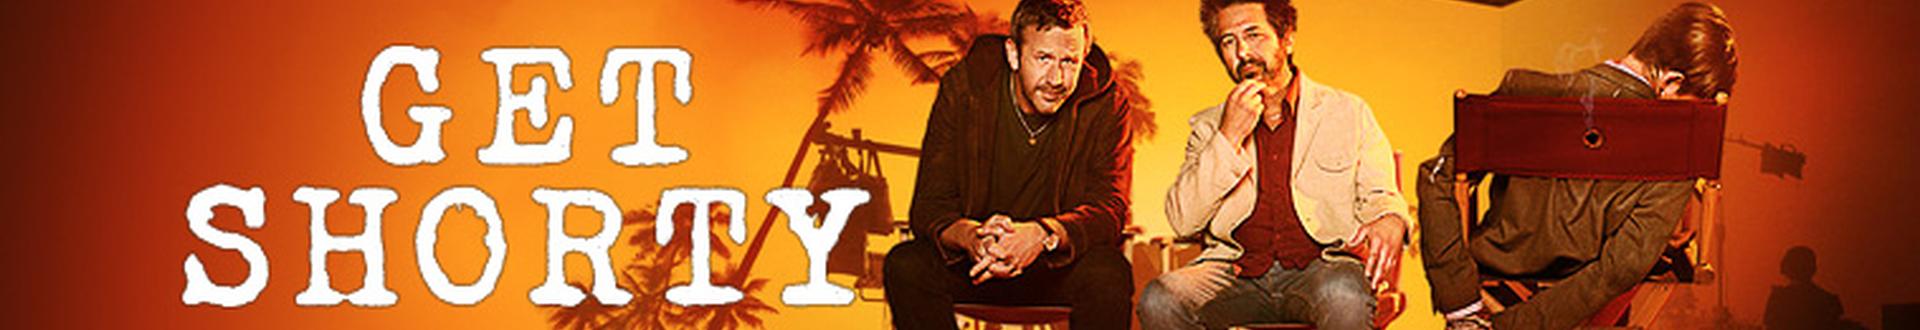 Get Shorty s03e02 (2019). Постер HD К get Shorty. Go shorty it s your